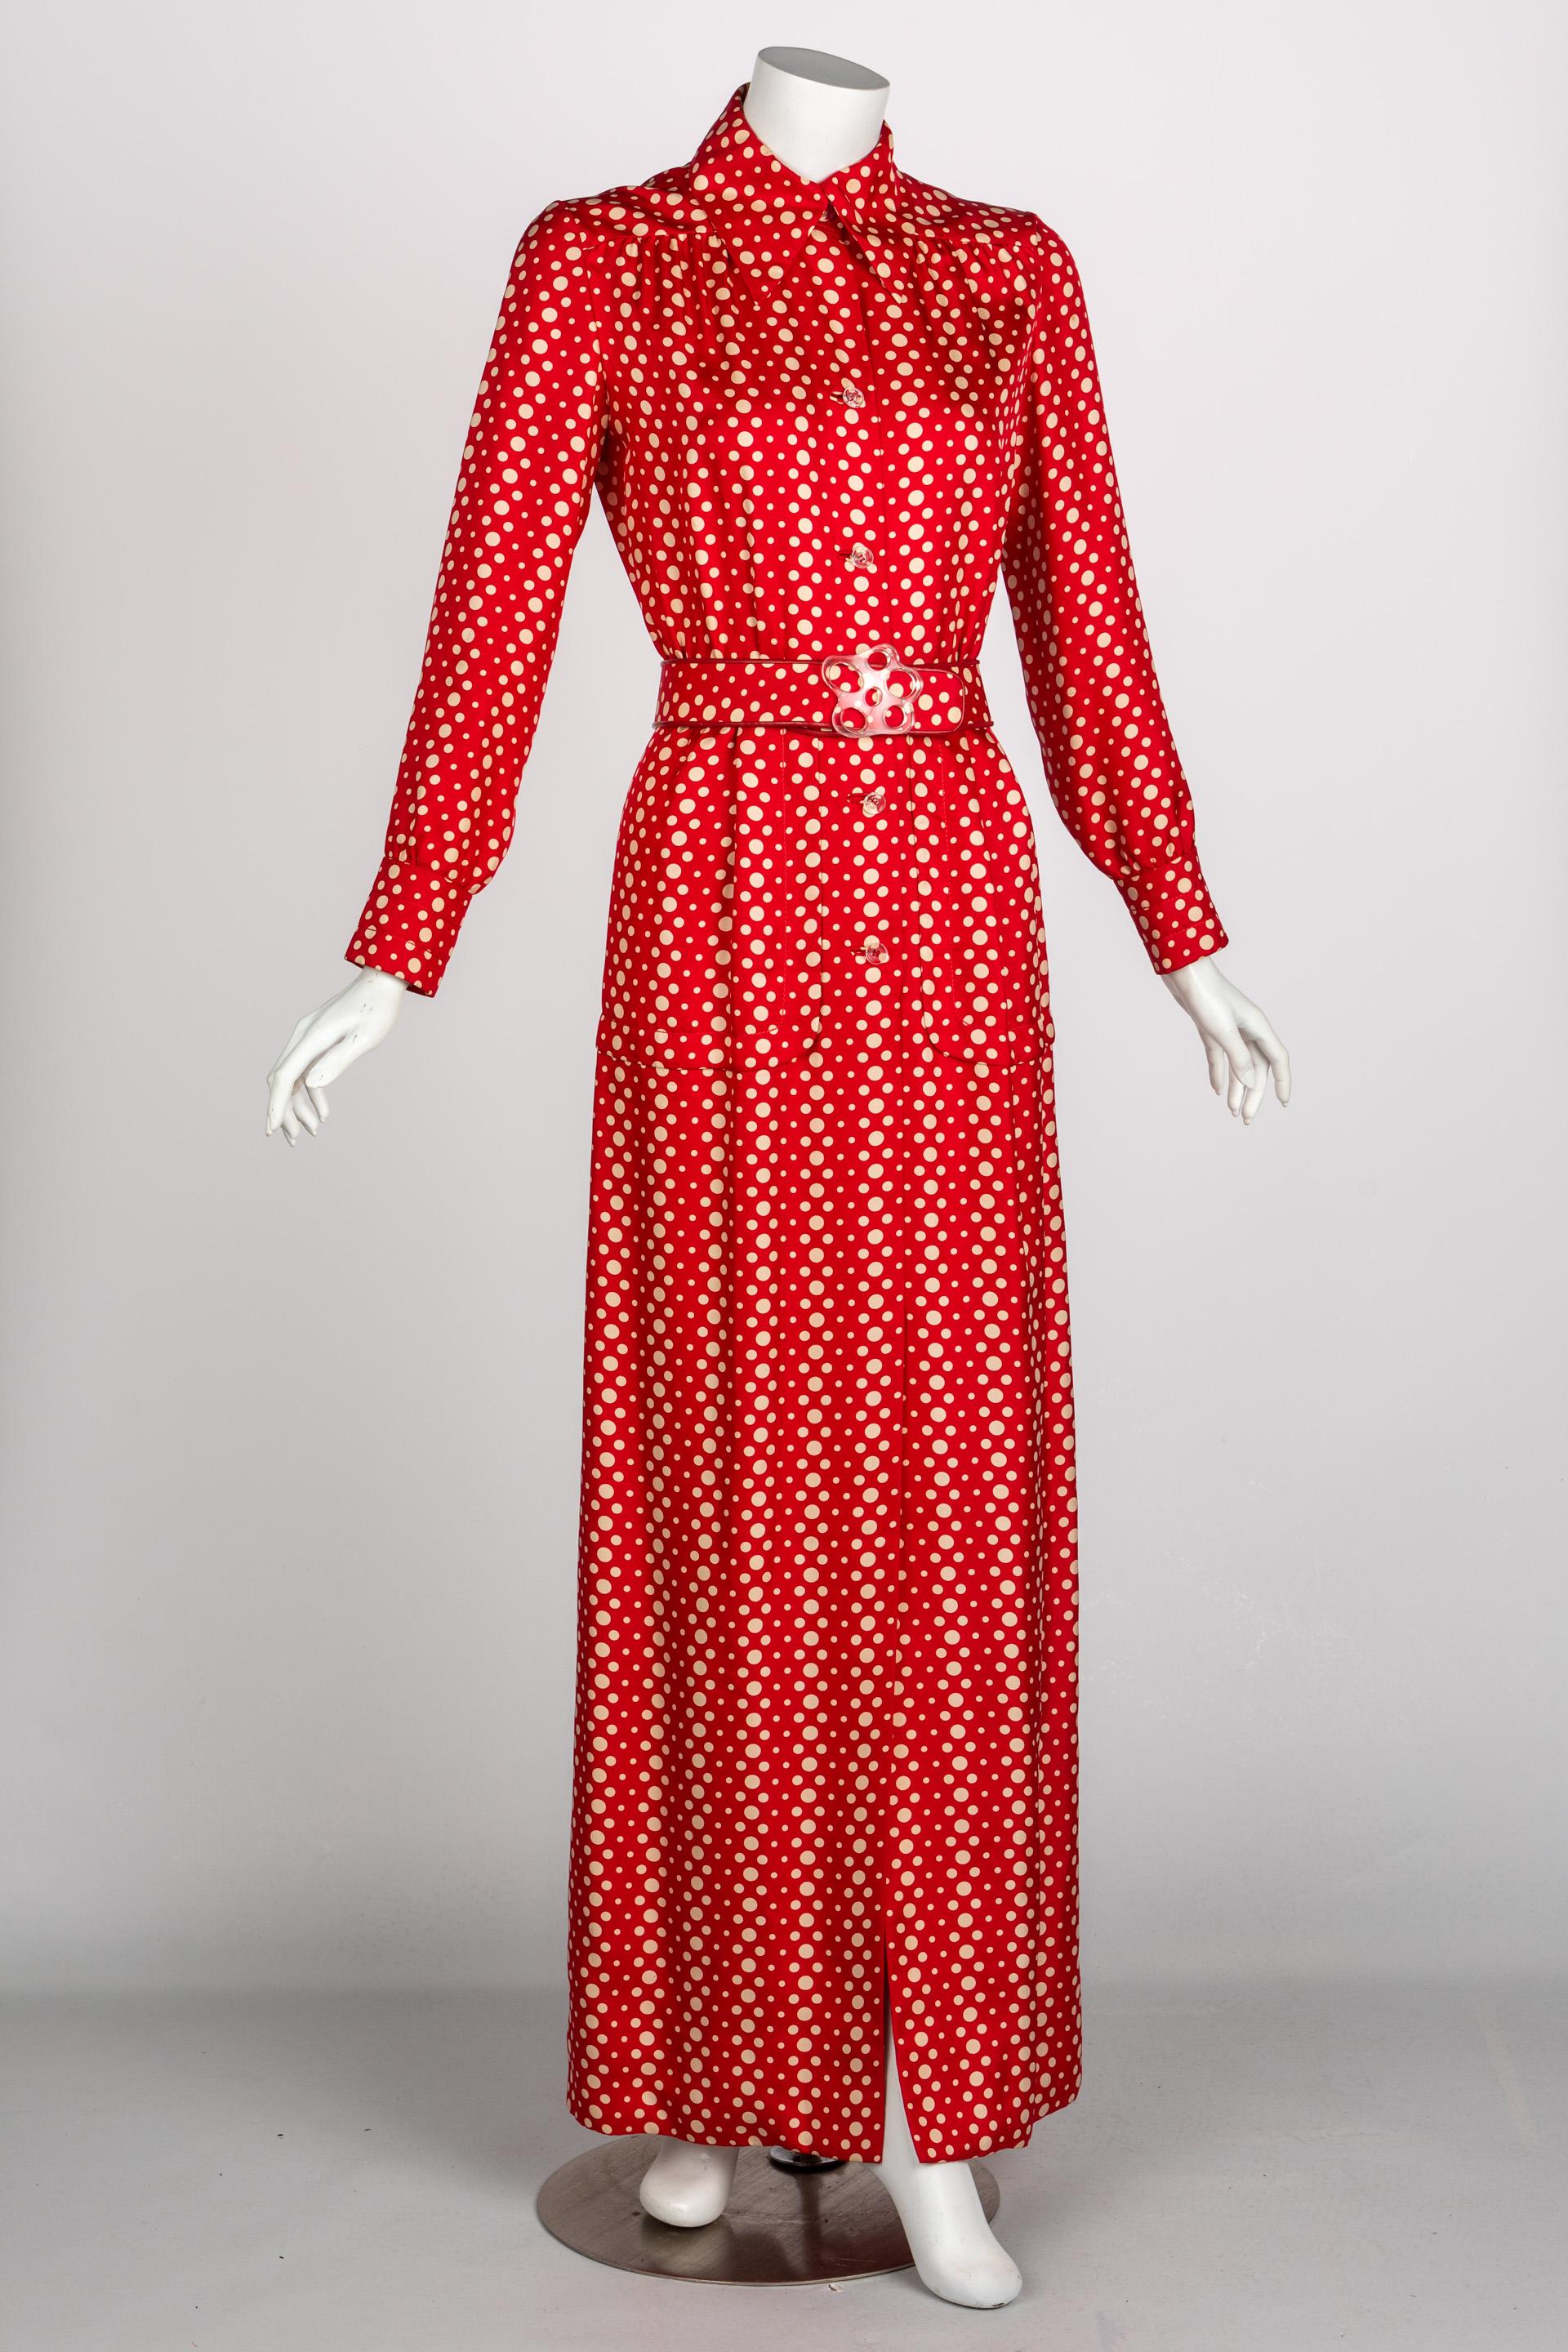 Galanos Red Polka Dot Lucite Belted Silk Maxi Dress, 1970s In Good Condition For Sale In Boca Raton, FL